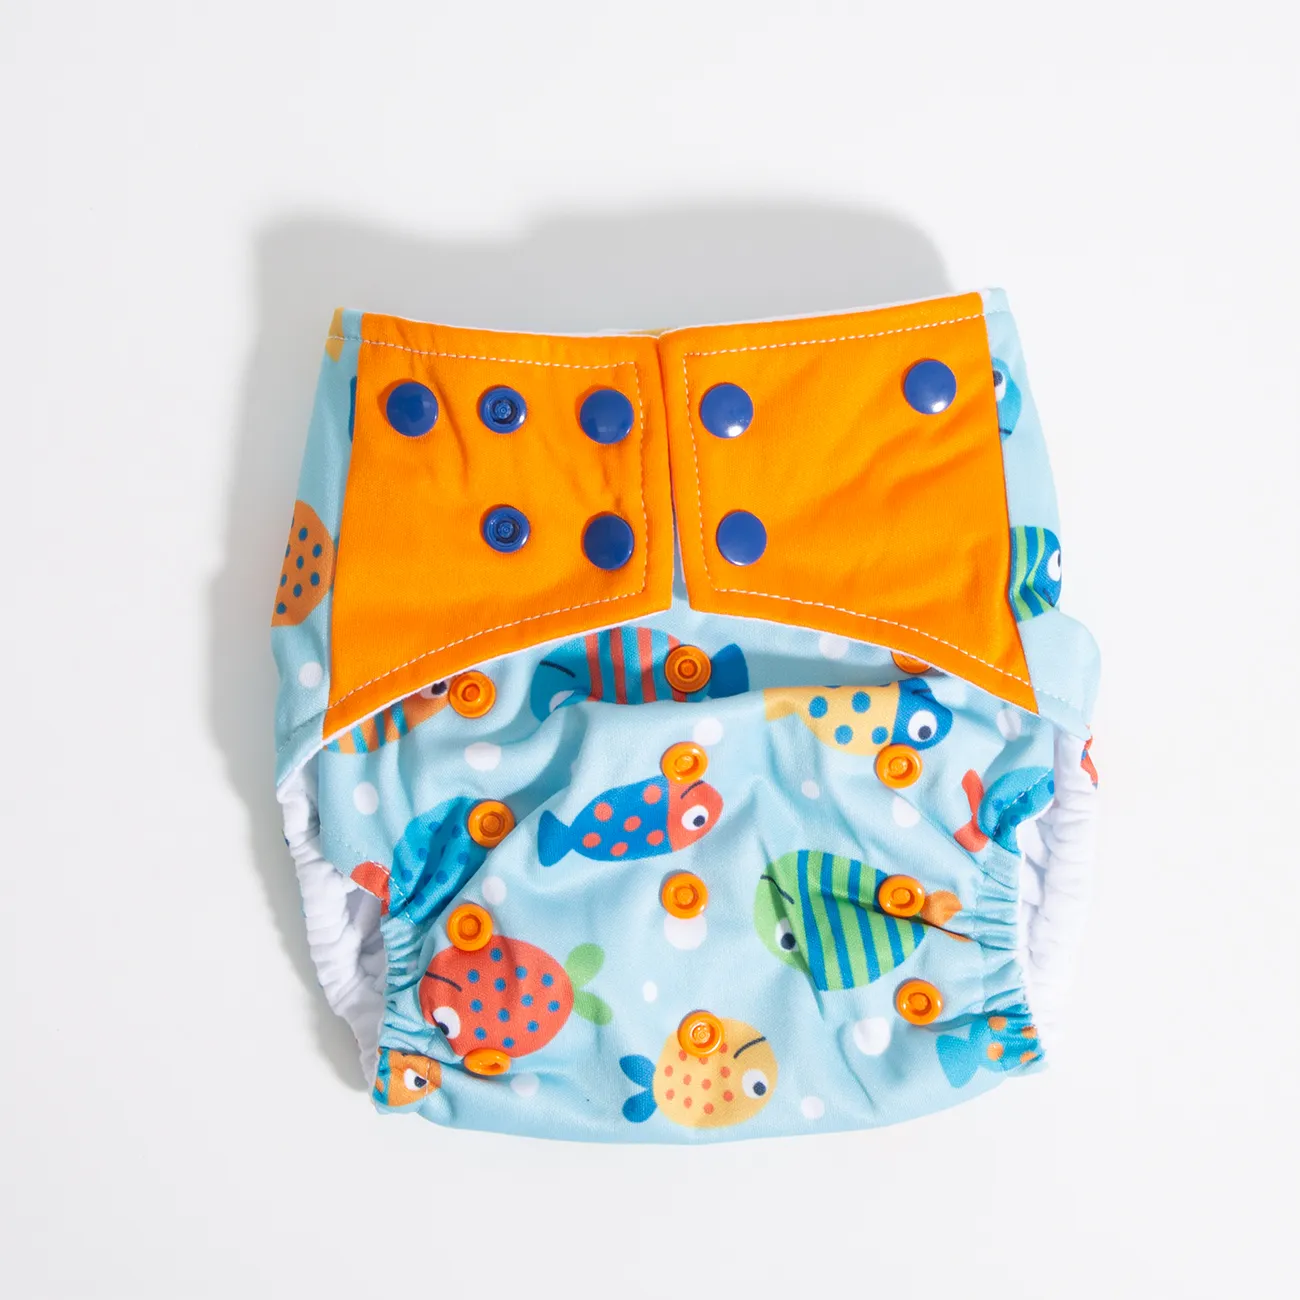 Washable Baby Cloth Diapers - Waterproof And Leakproof With Three-Layer Design For Comfortable Fit